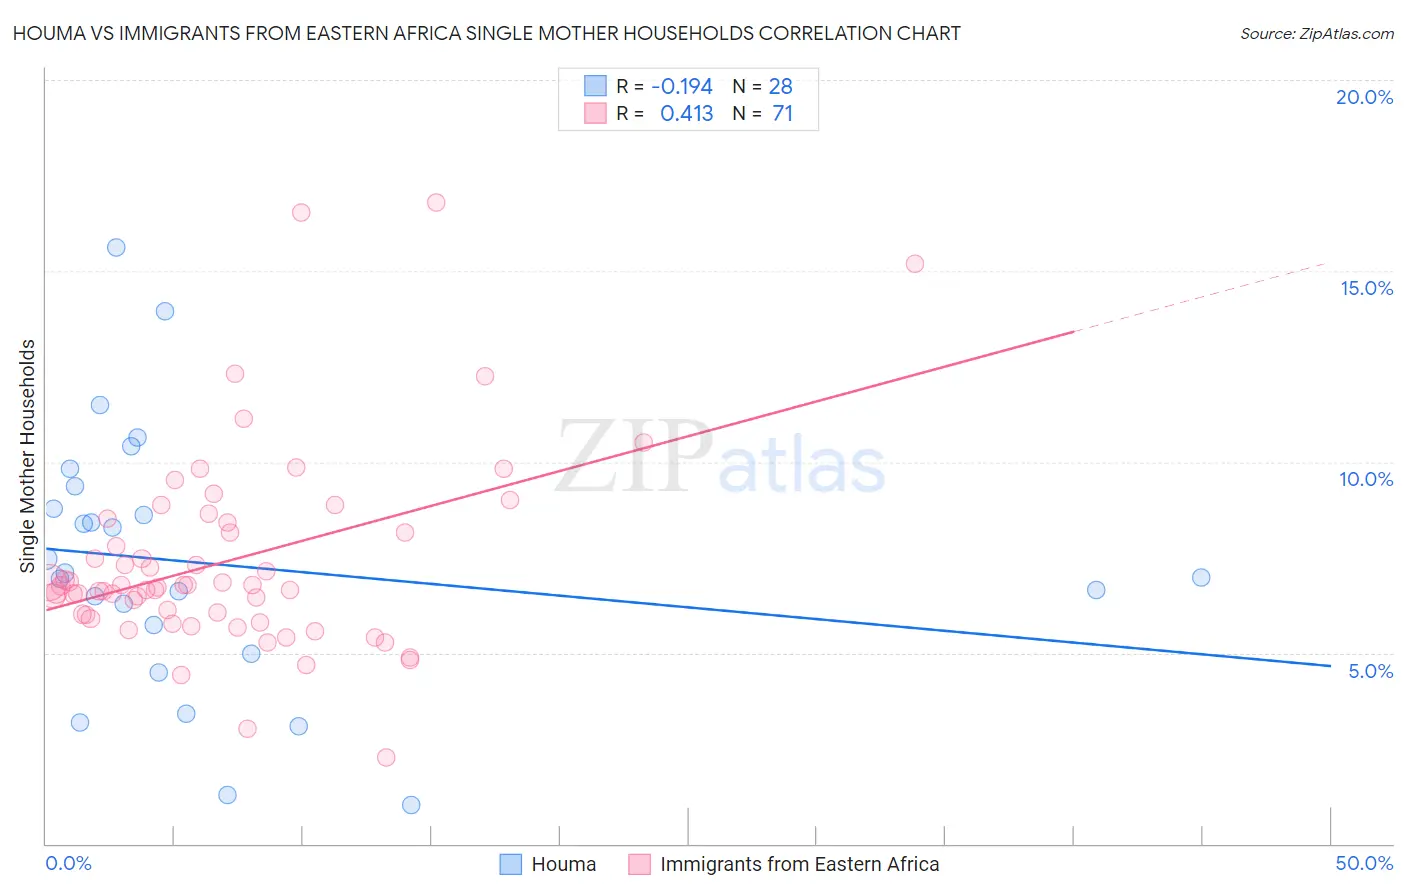 Houma vs Immigrants from Eastern Africa Single Mother Households